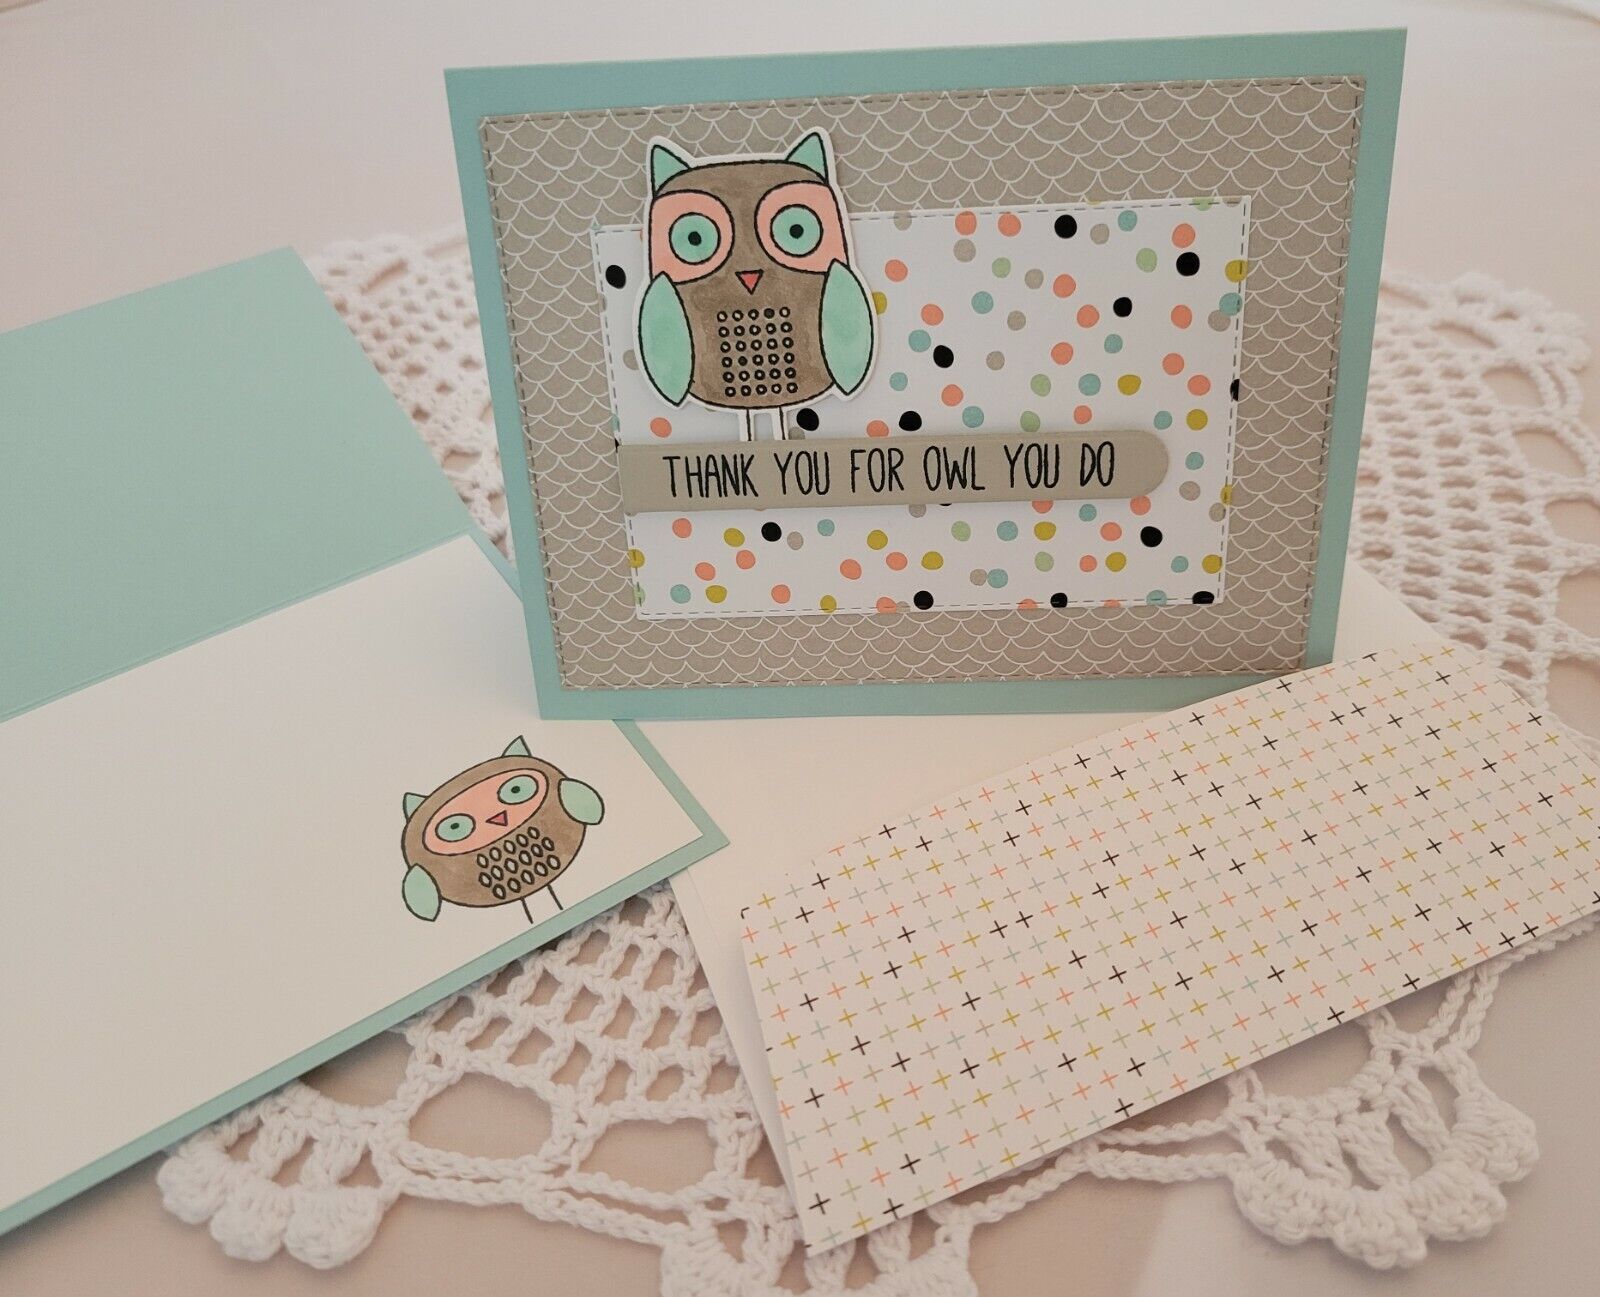 Lot of 6 handmade Thank You for Owl You Do Thank You cards made w/ Stampin' Up! Homemade